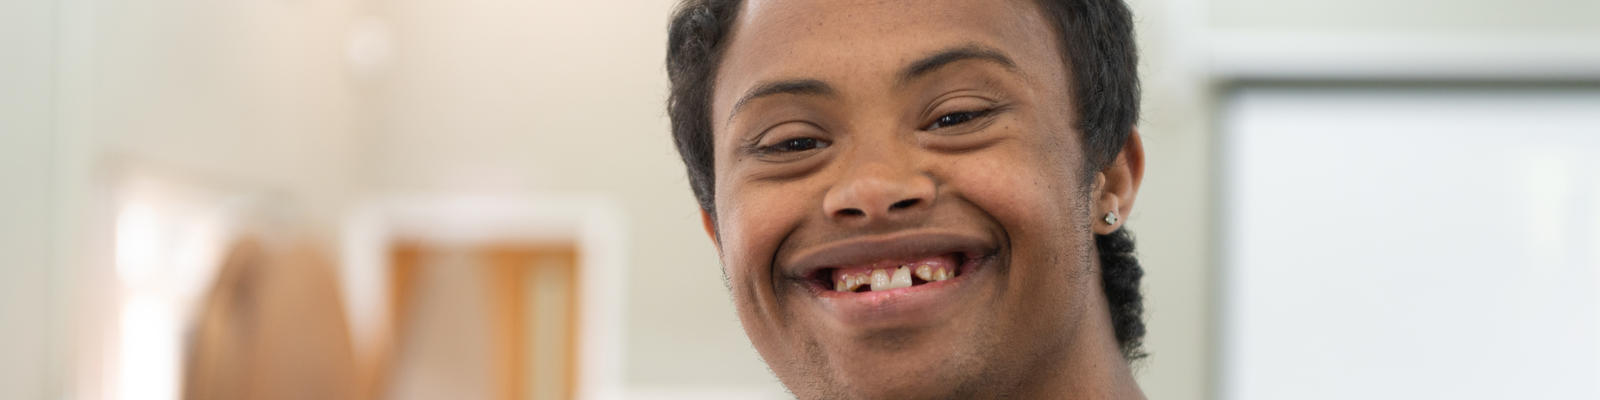 Young man with down syndrome smiling wide at the camera